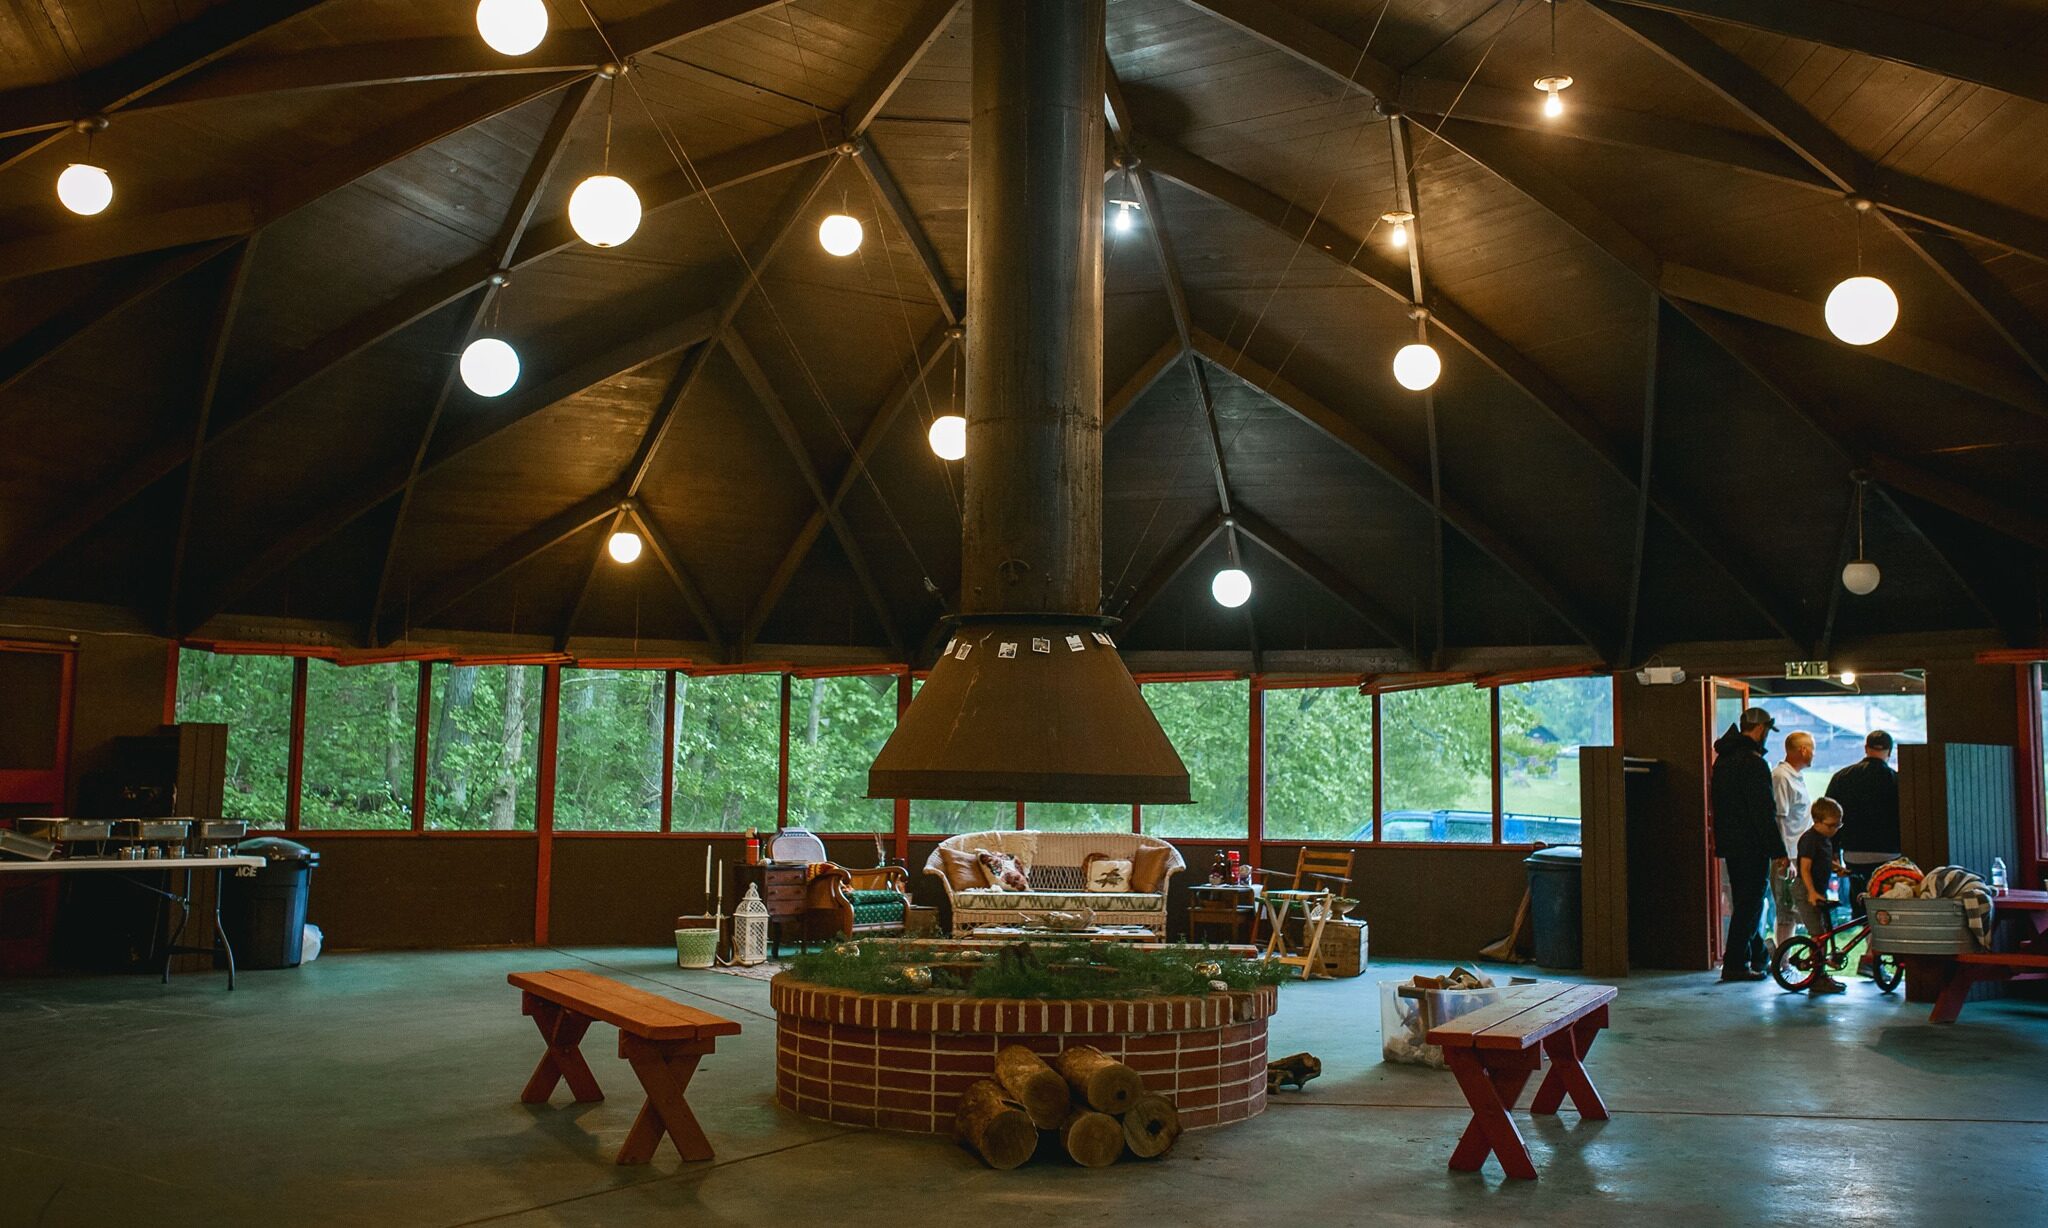 Camp Cann-Edi-On dining hall featuring a round room with a domed ceiling and a fireplace in the center decorated for a wedding